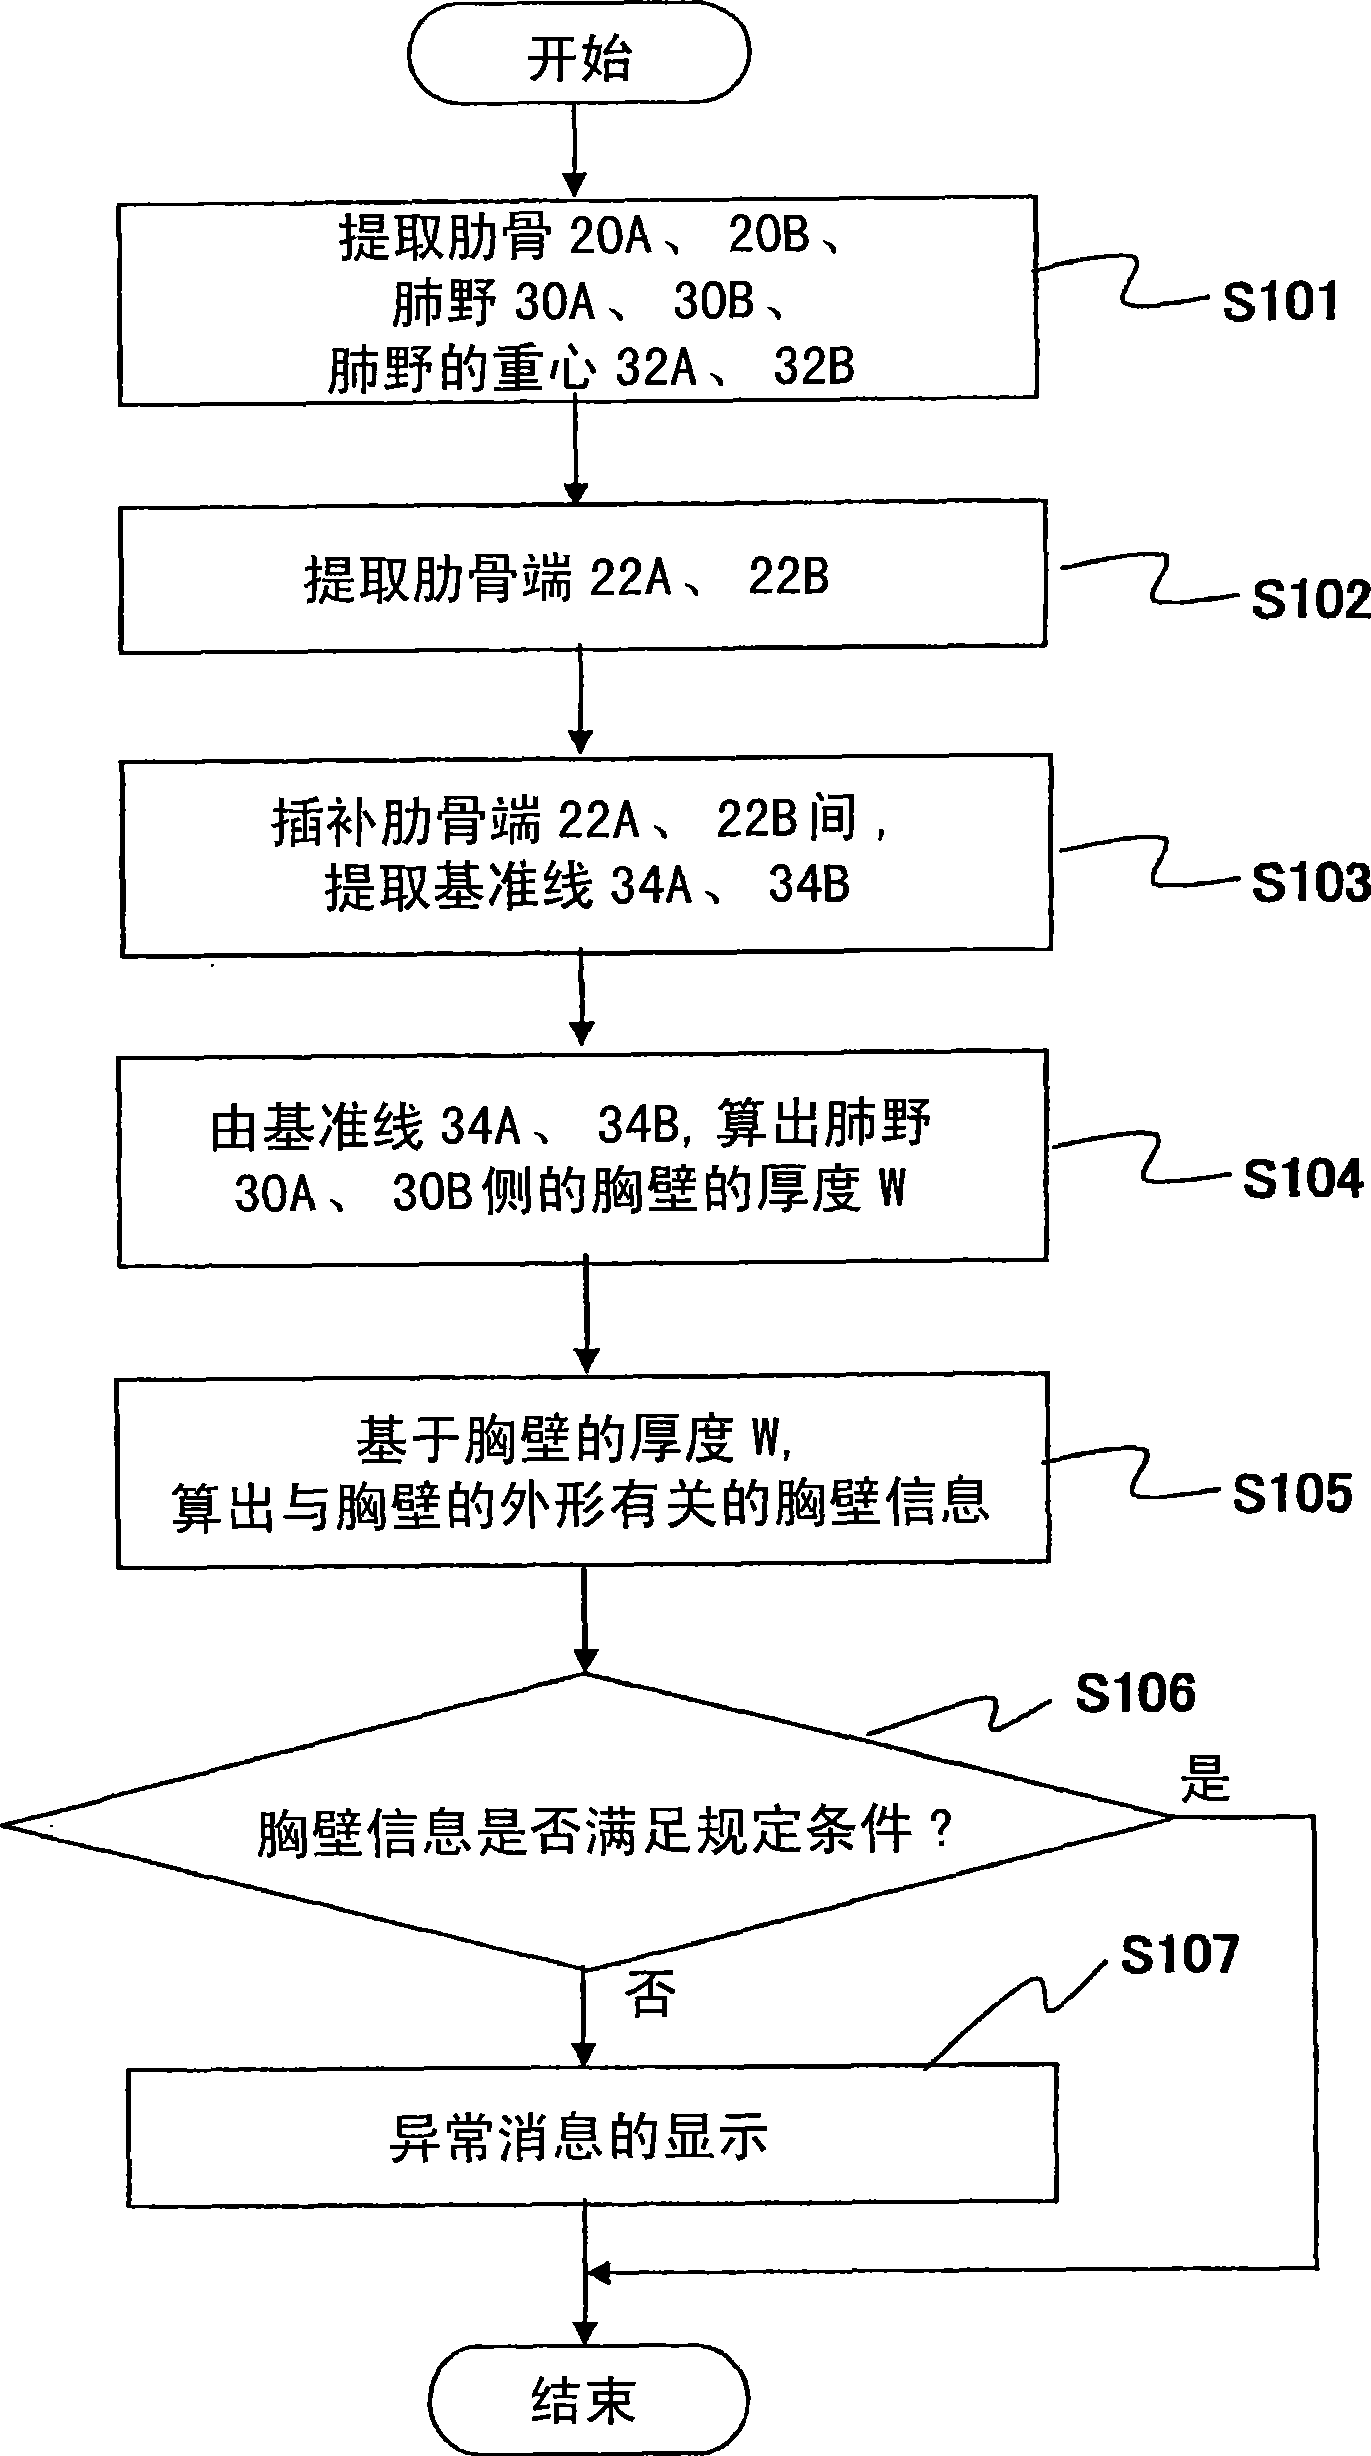 Image diagnosis support device and image diagnosis support program